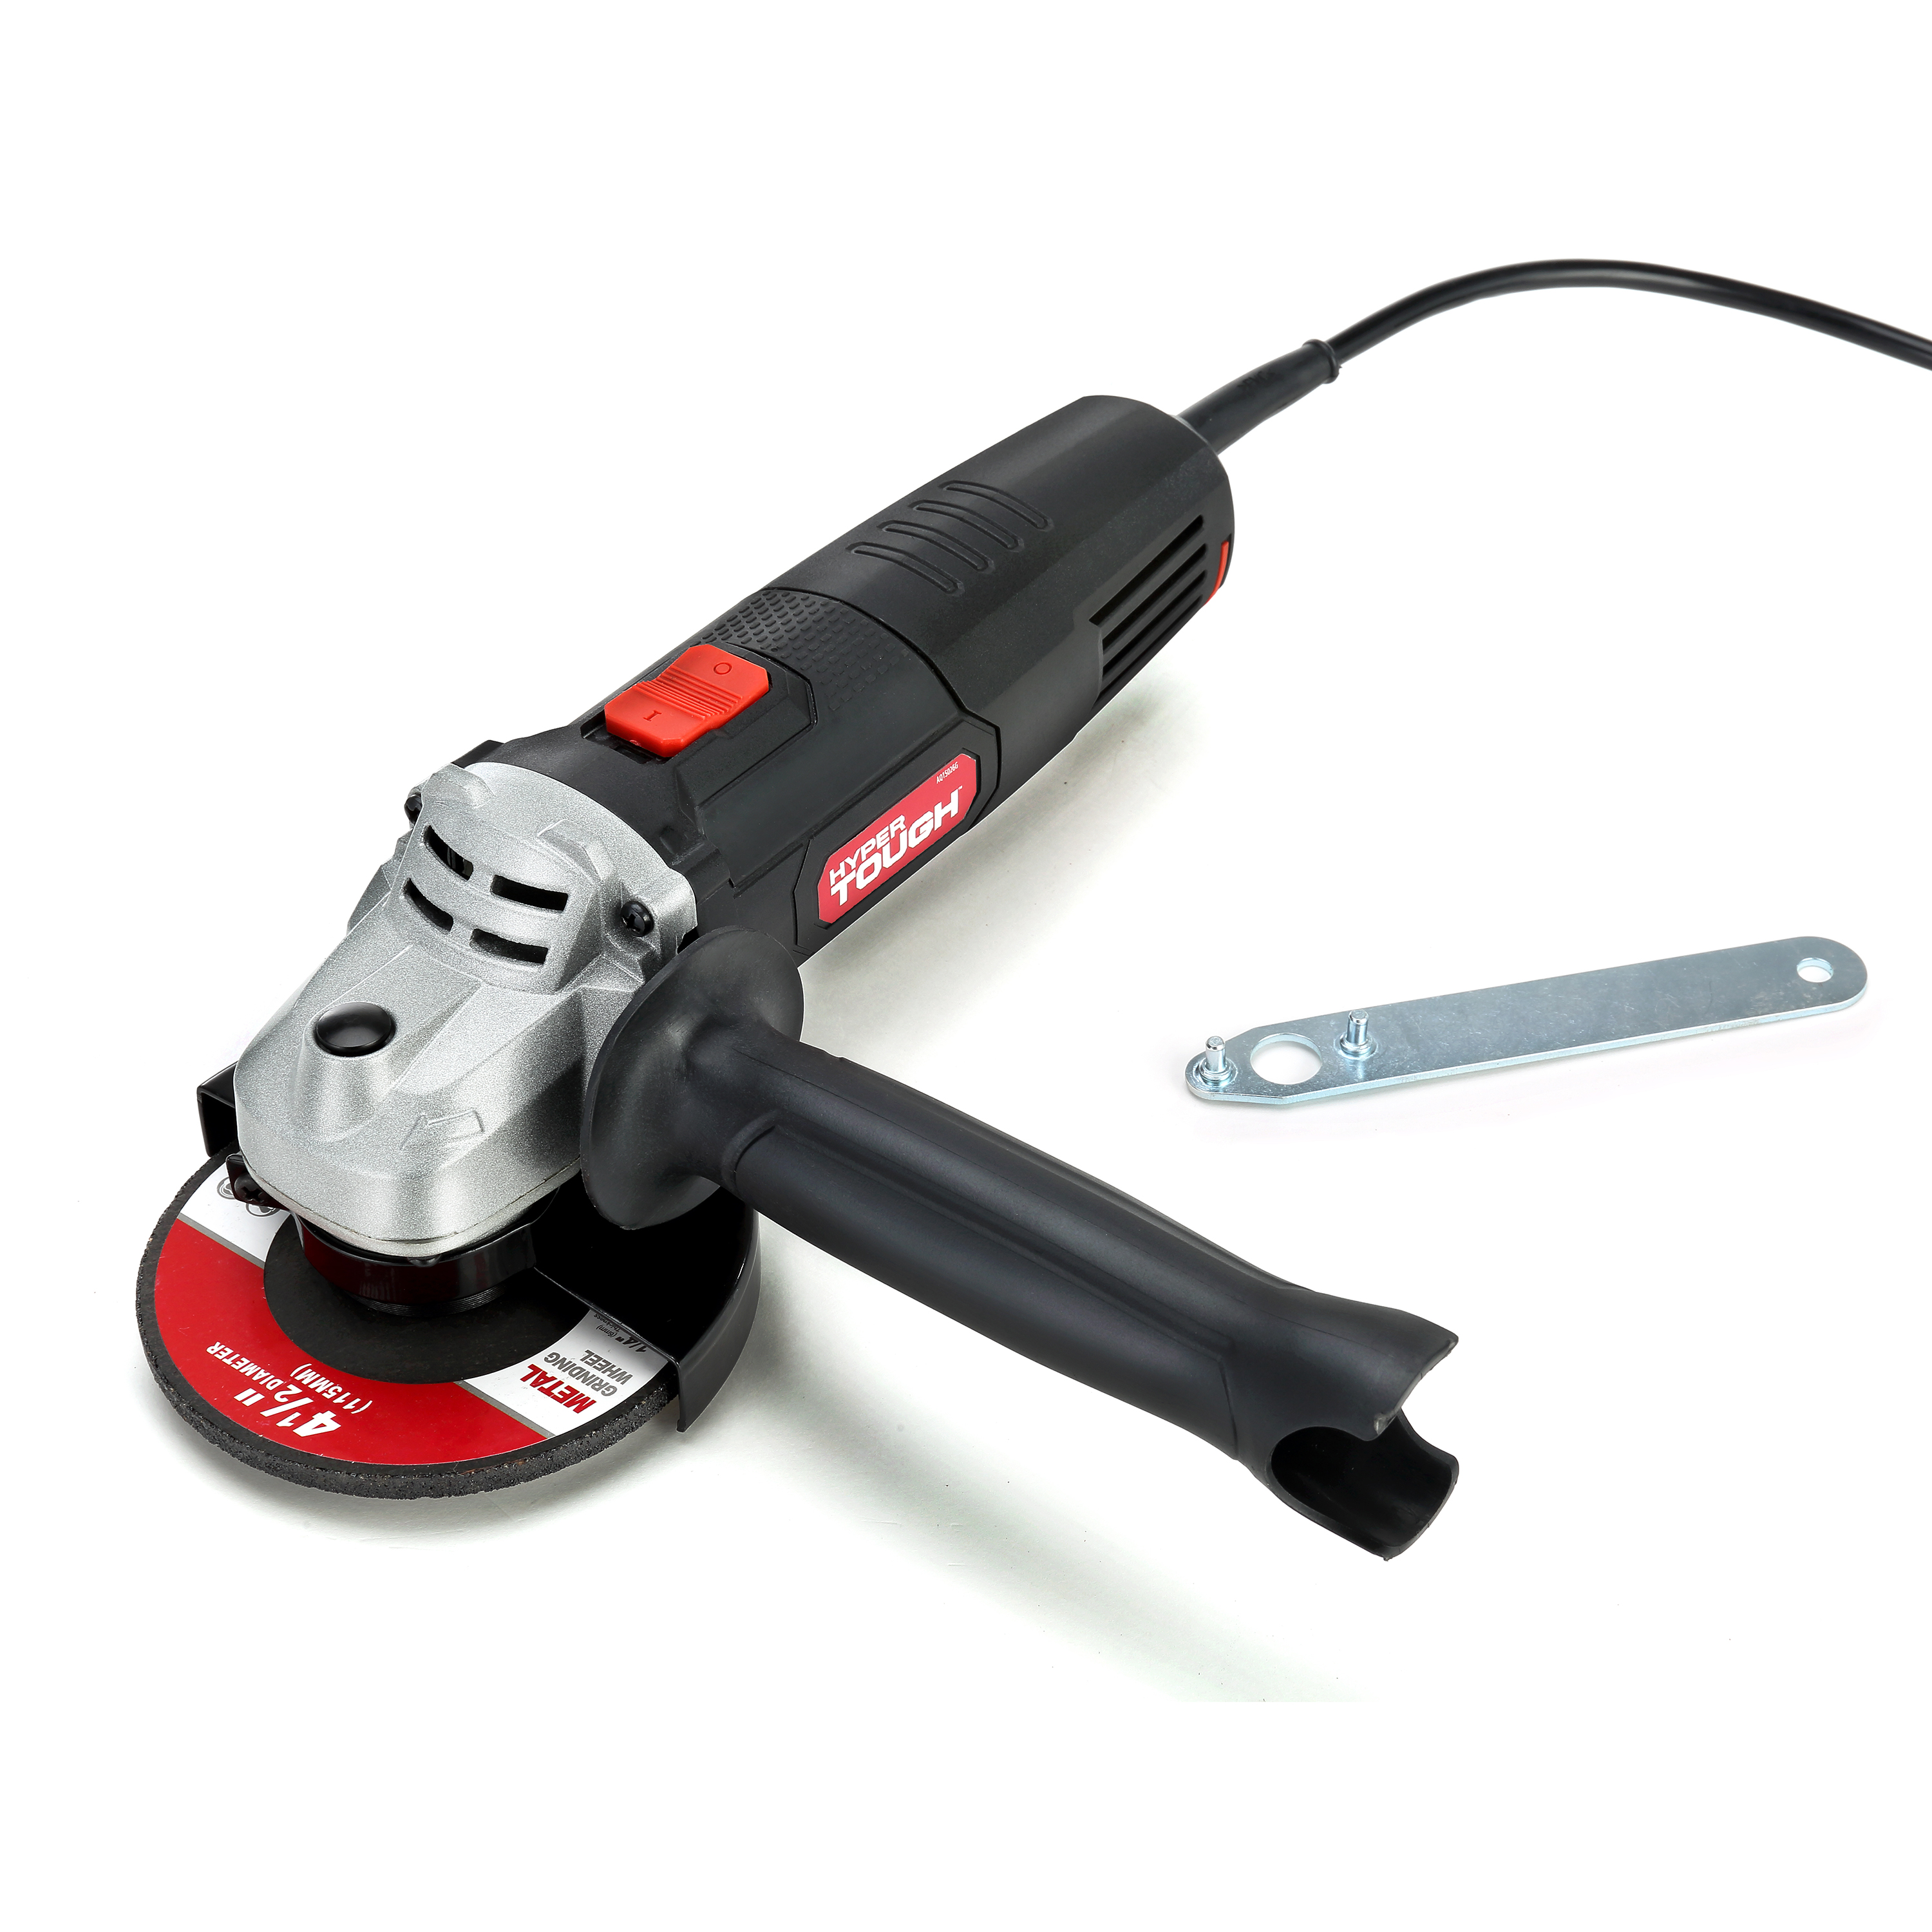 Hyper Tough 6 Amp Corded Angle Grinder with Handle, Adjustable Guard, 4-1/2 inch Grinding Wheel & Wrench - image 3 of 18